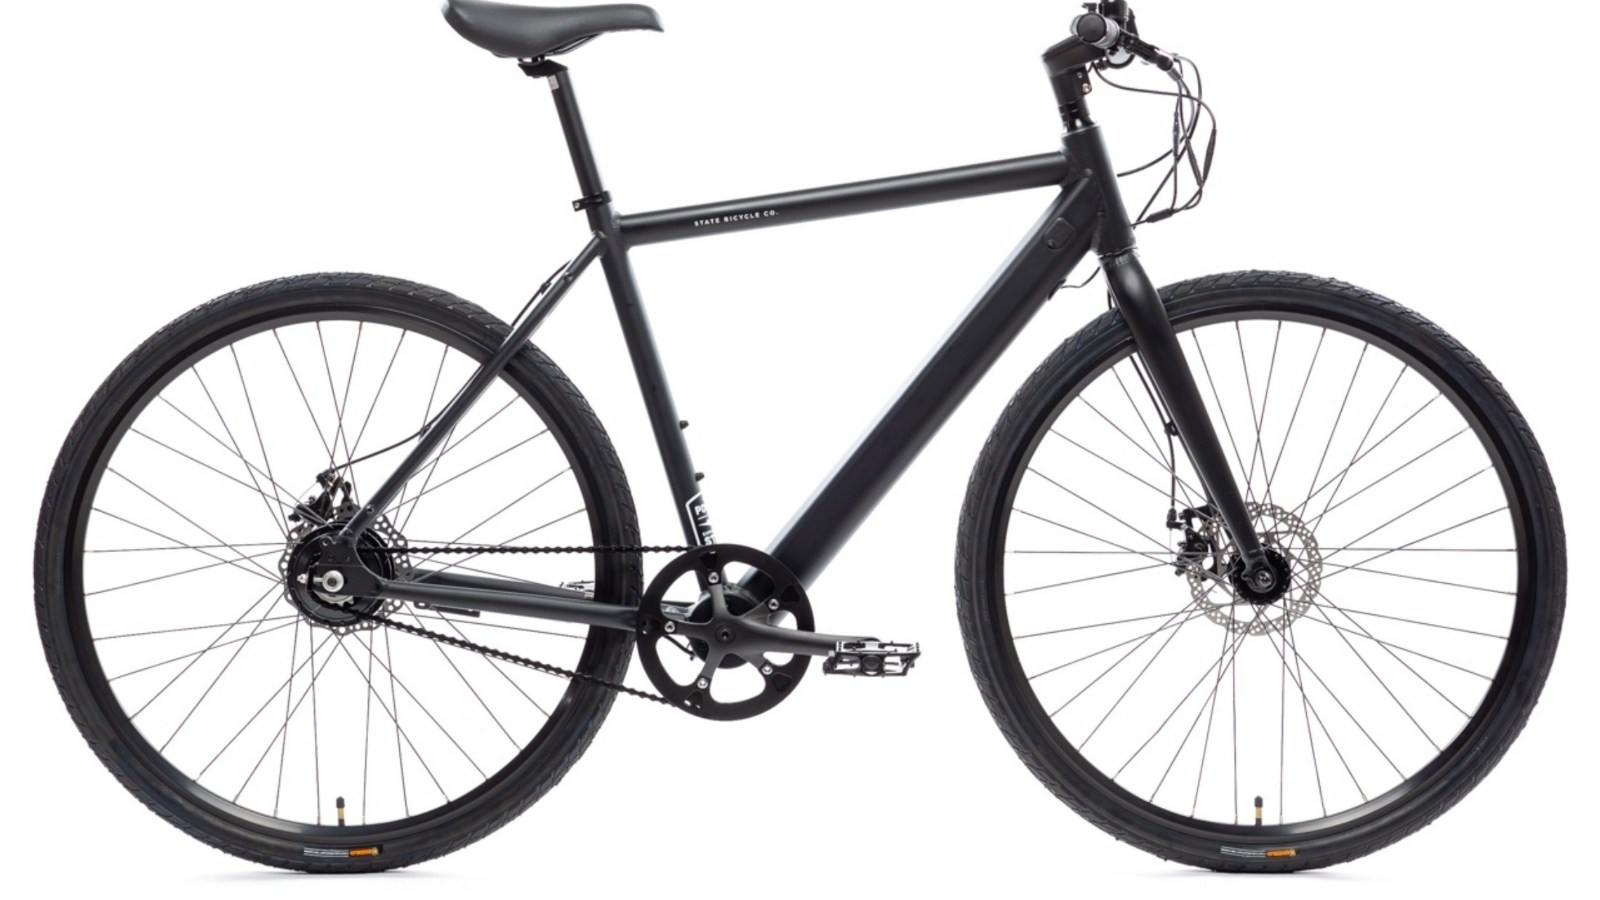 State Bicycle Co. launches its first e-bike, the 6061 eBike Commuter single speed e-bike